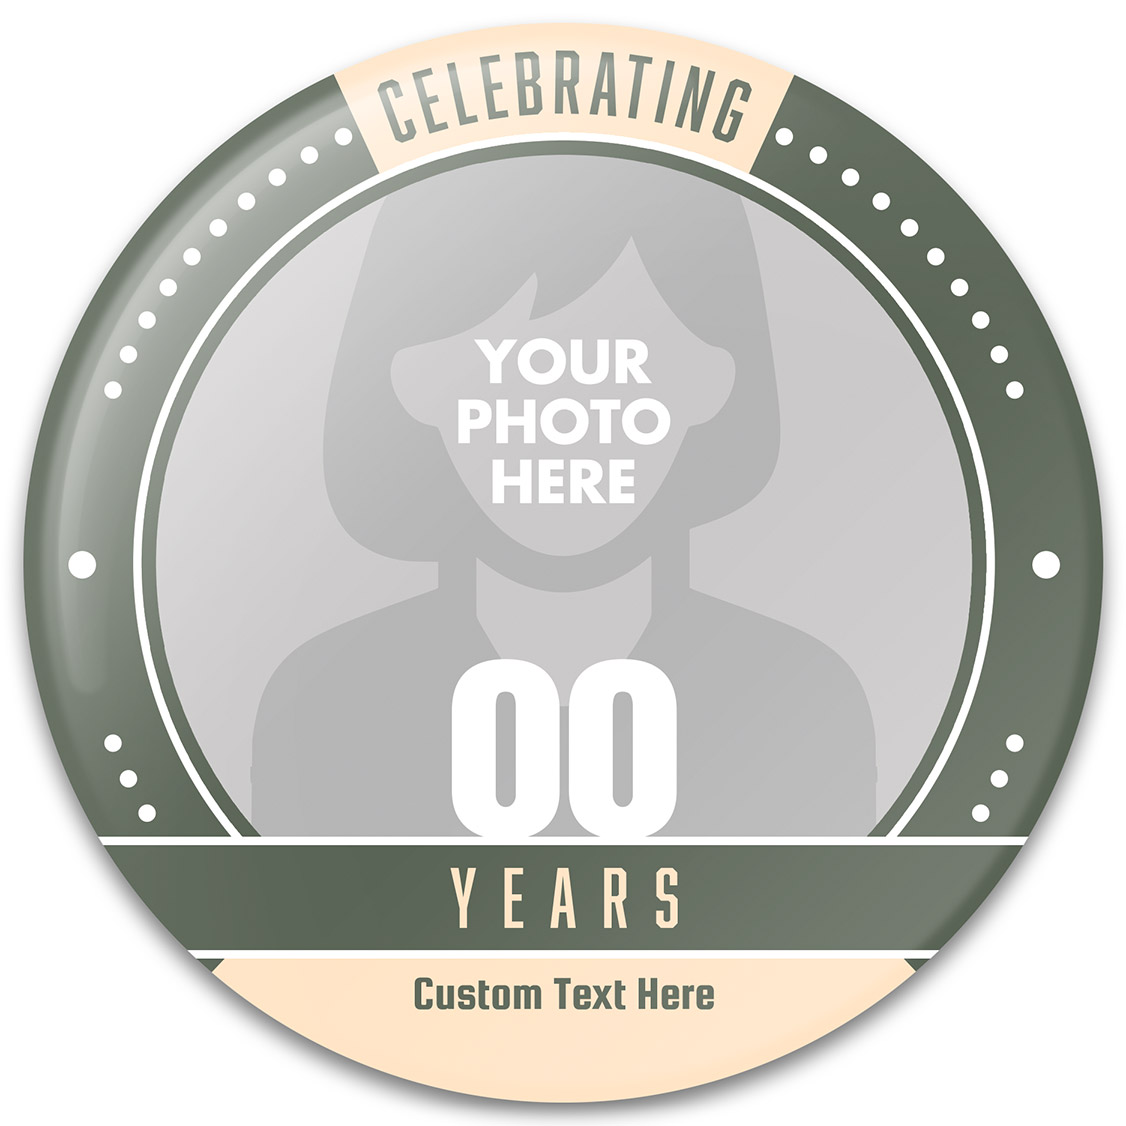 Heritage Anniversary - Personalized Anniverary Gift Template